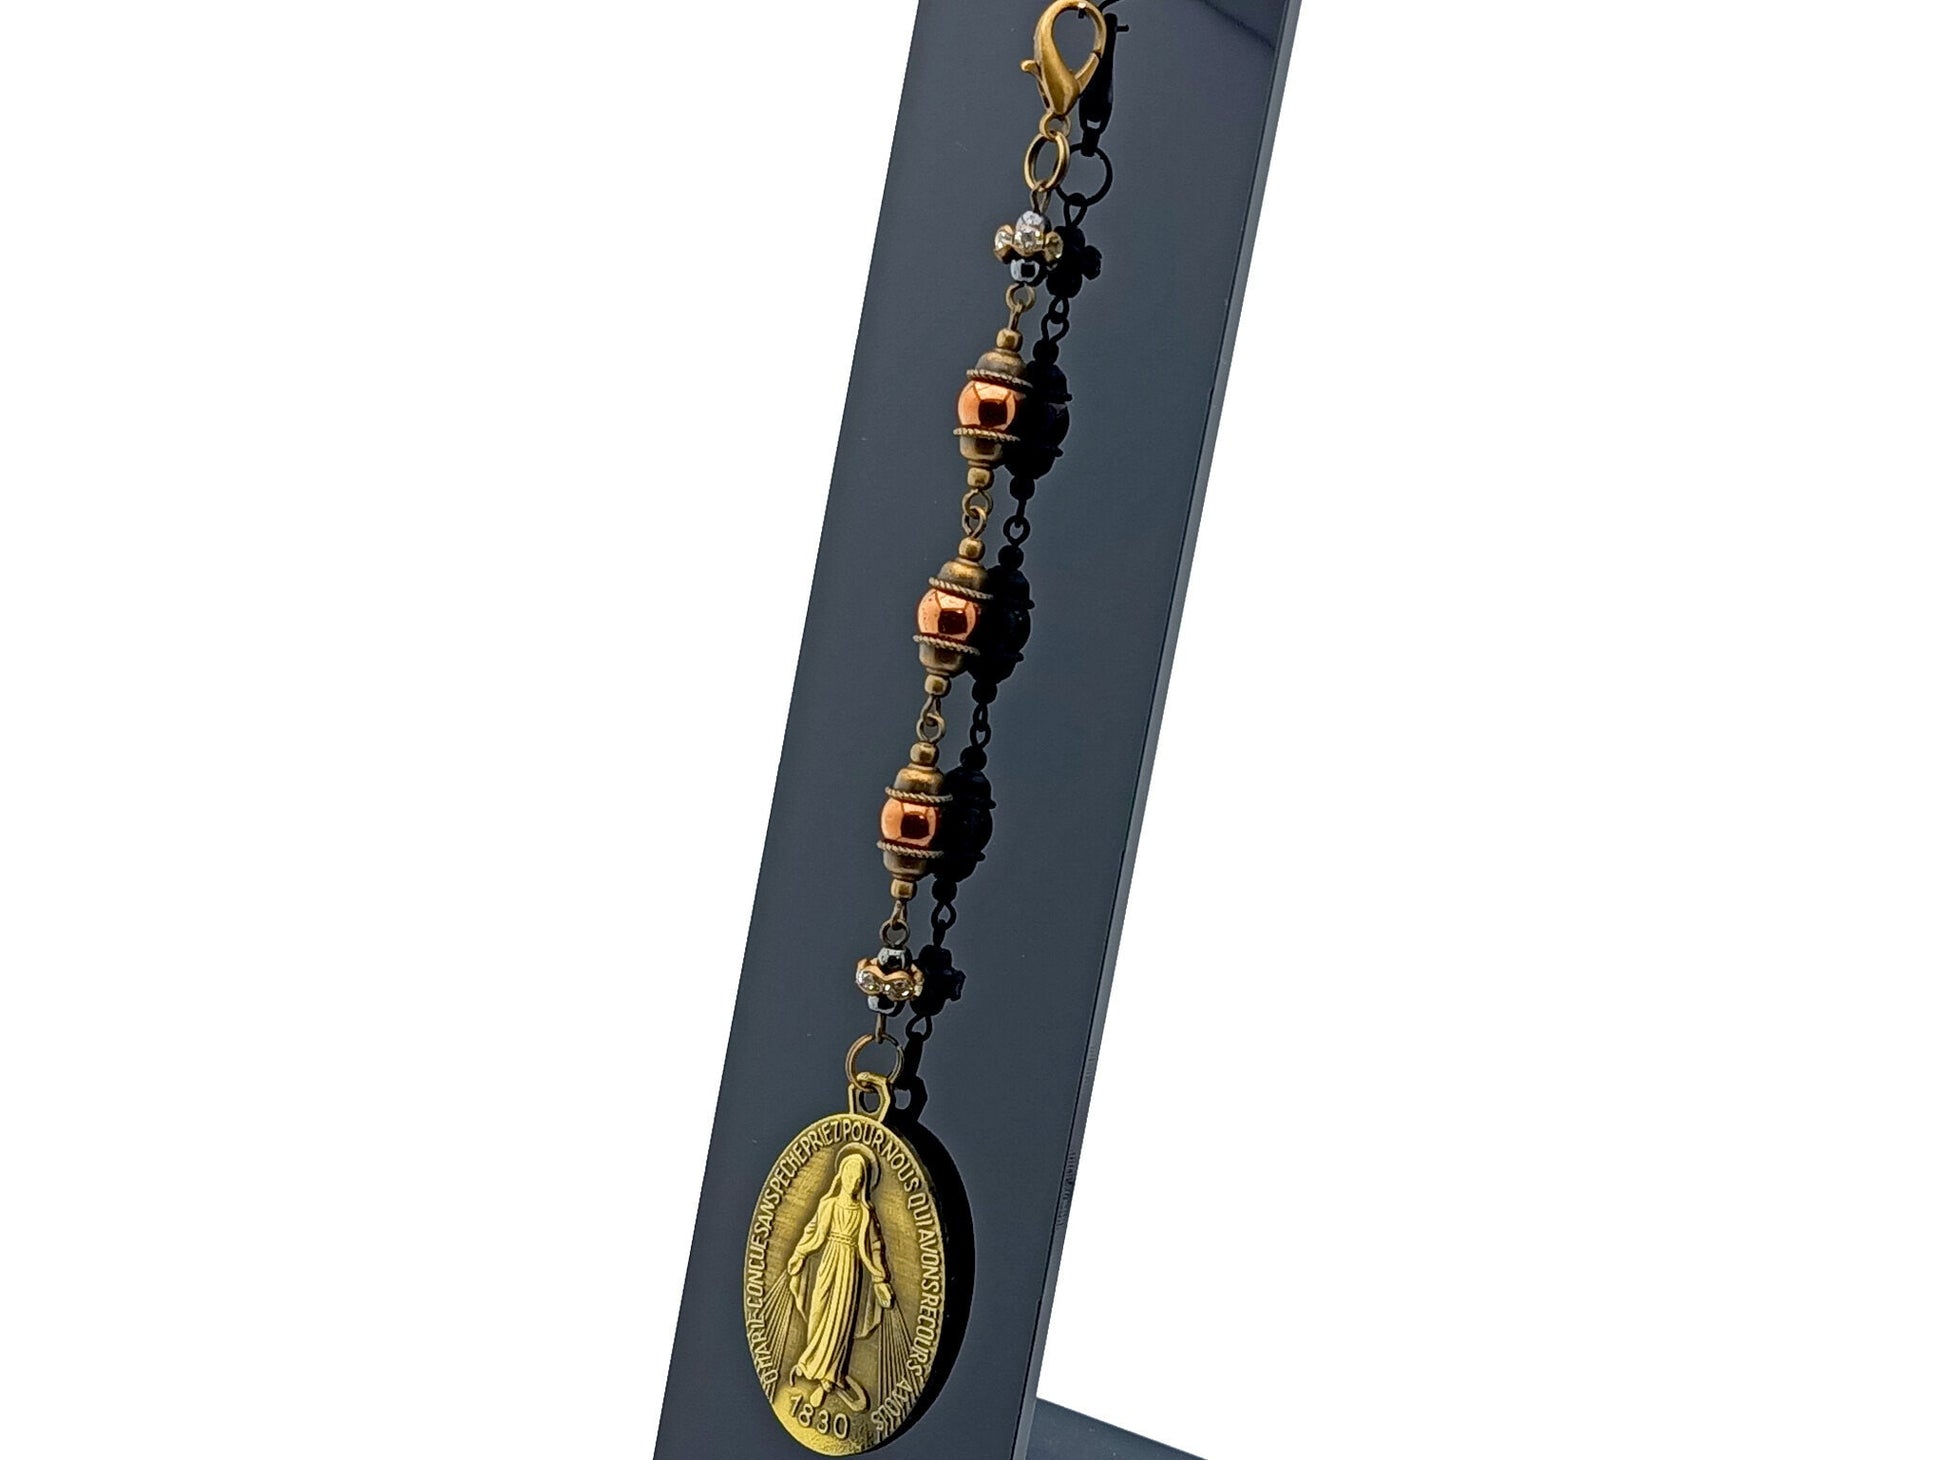 Vintage style Three Hail Mary unique rosary beads prayer chaplet with brass Miraculous medal and copper hematite gemstone bead on lobster purse clip.